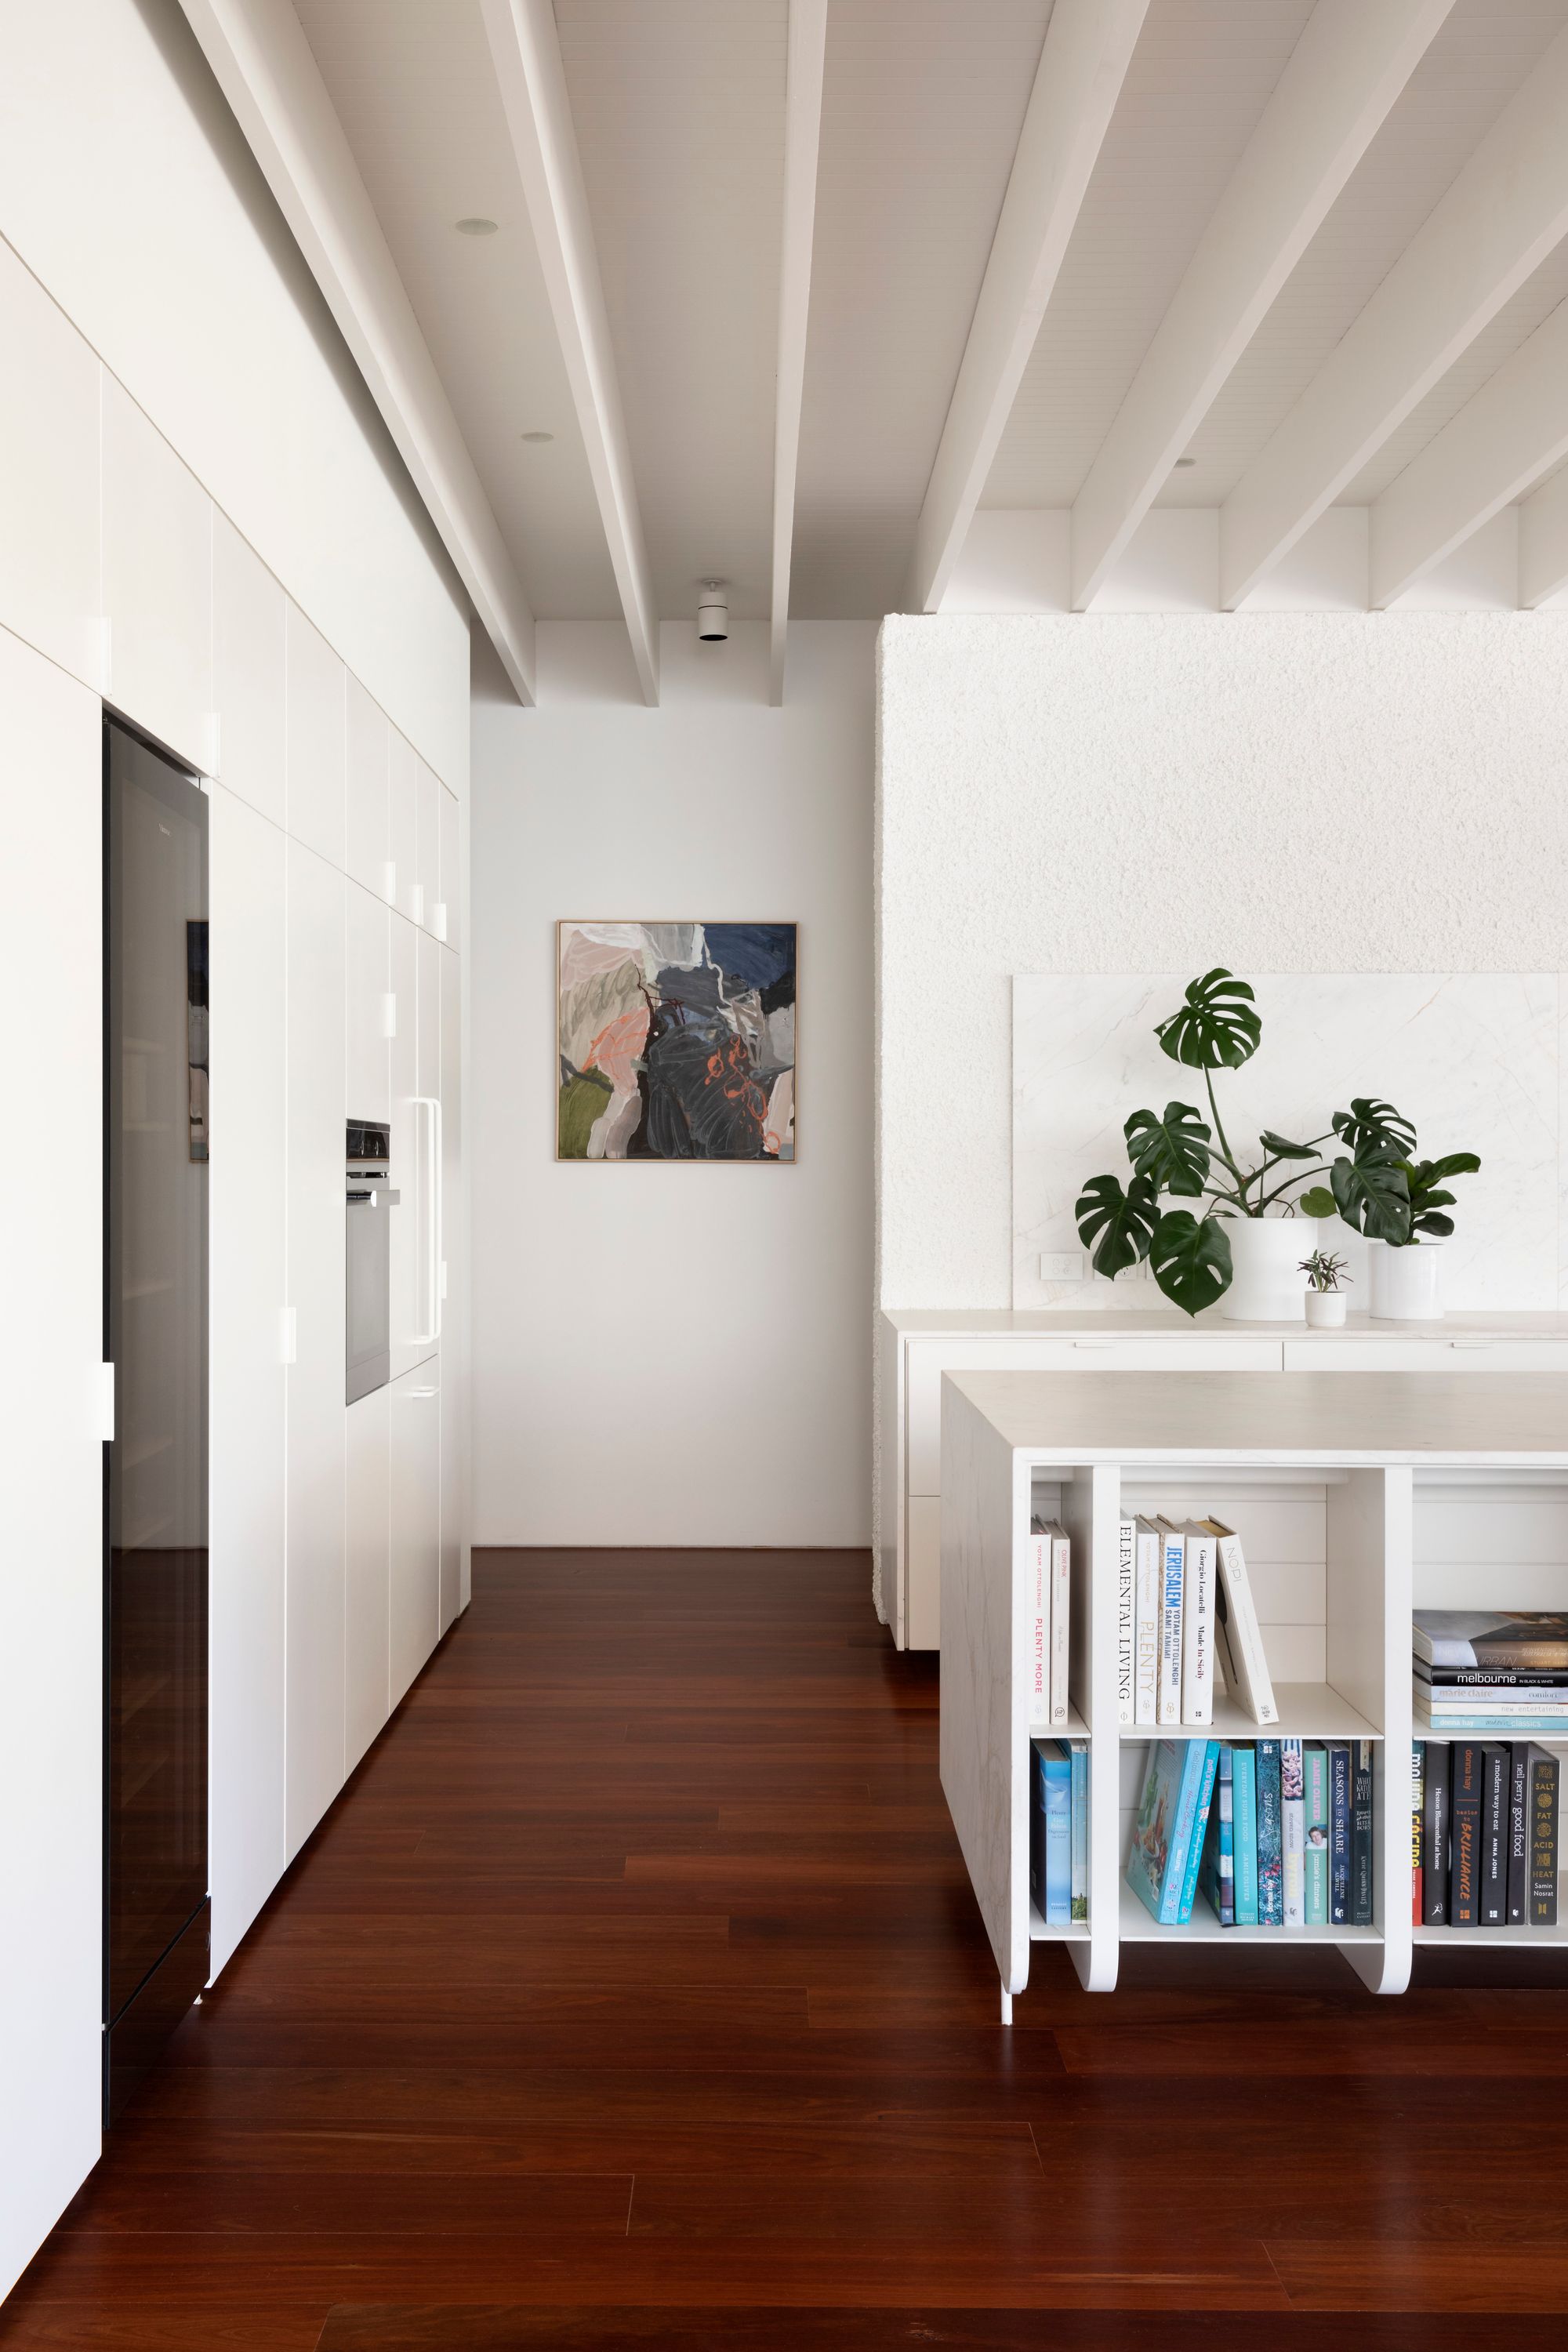 Elwood House by AM Architecture showing interior of kitchen space with white island bench and timber floors